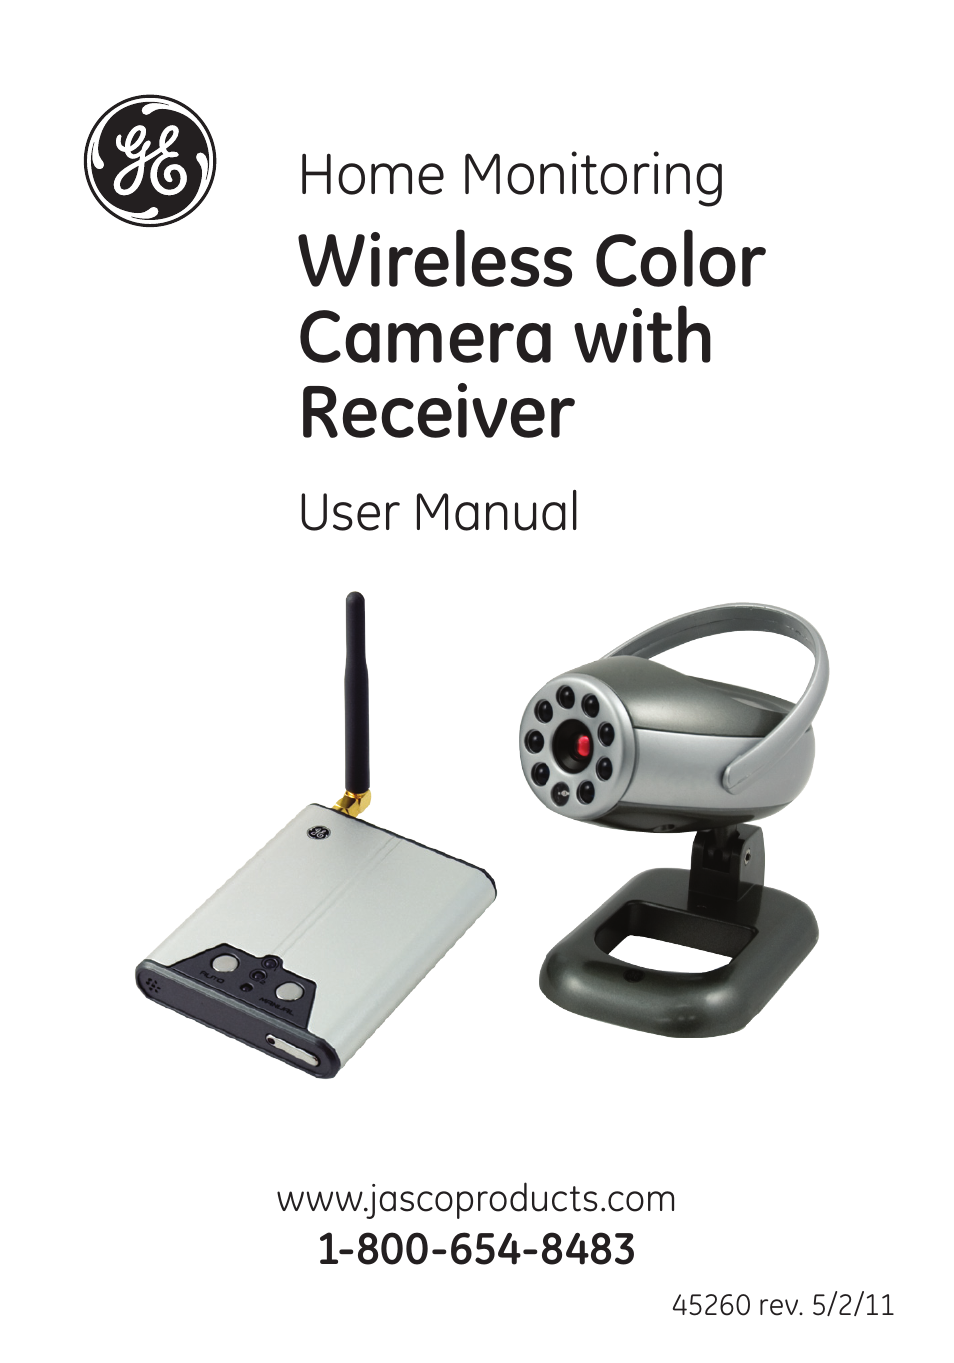 GE 45260 GE Home Monitoring Wireless Color Camera System with Receiver User Manual | 16 pages